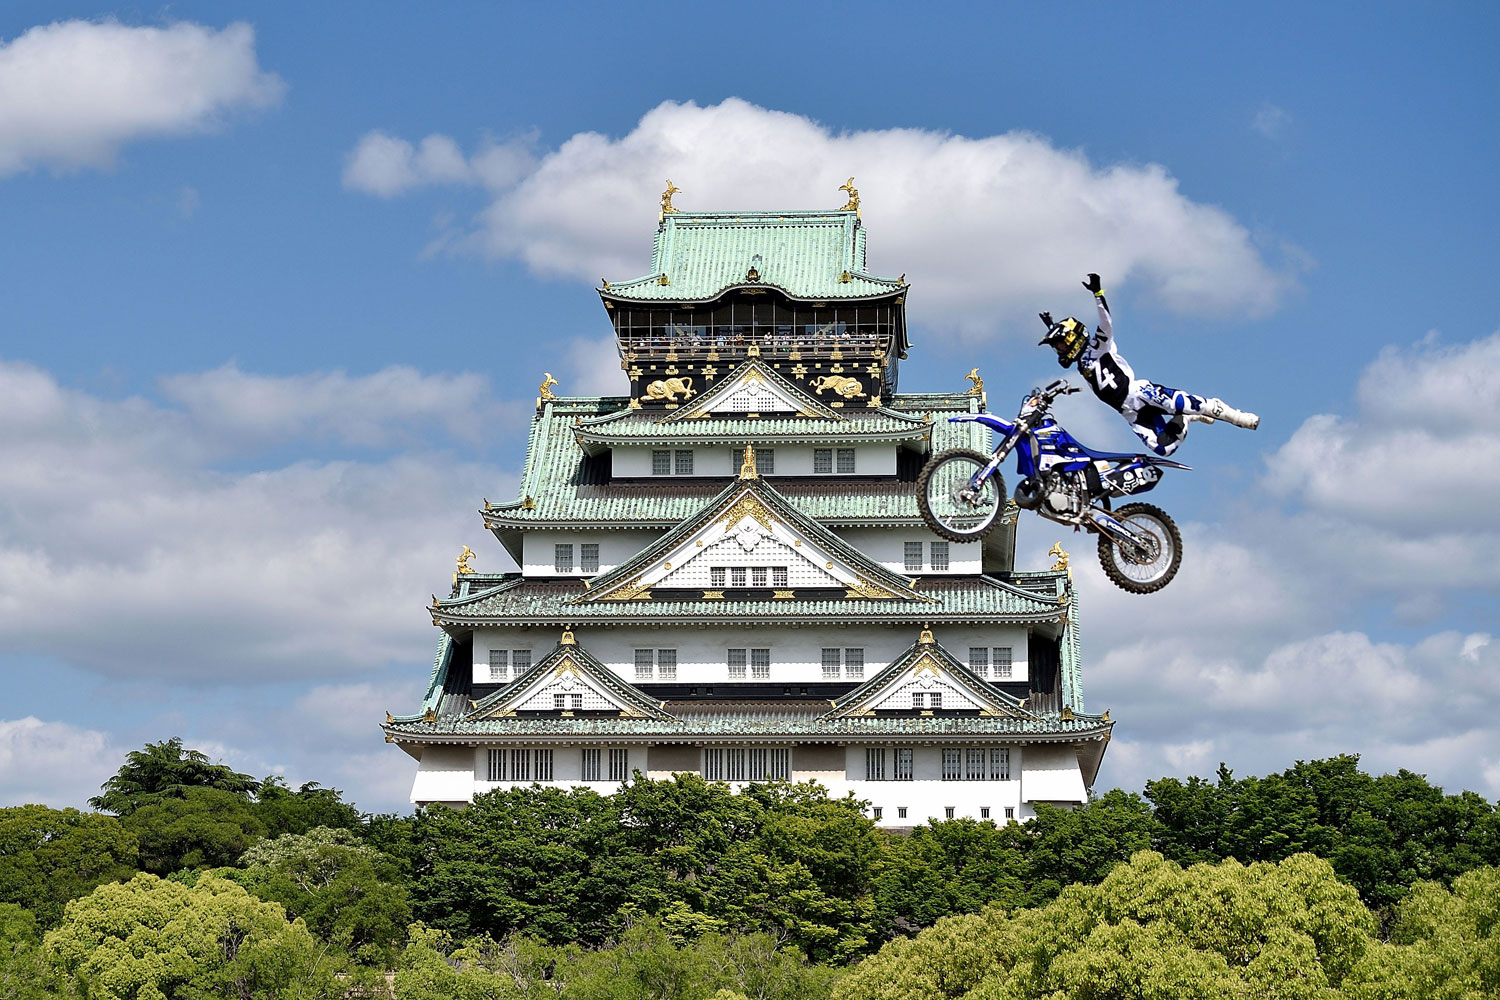 A Red Bull X-Fighter rider during training for the Red Bull X-Fighters World Tour on May 23, 2014 in Osaka, Japan.